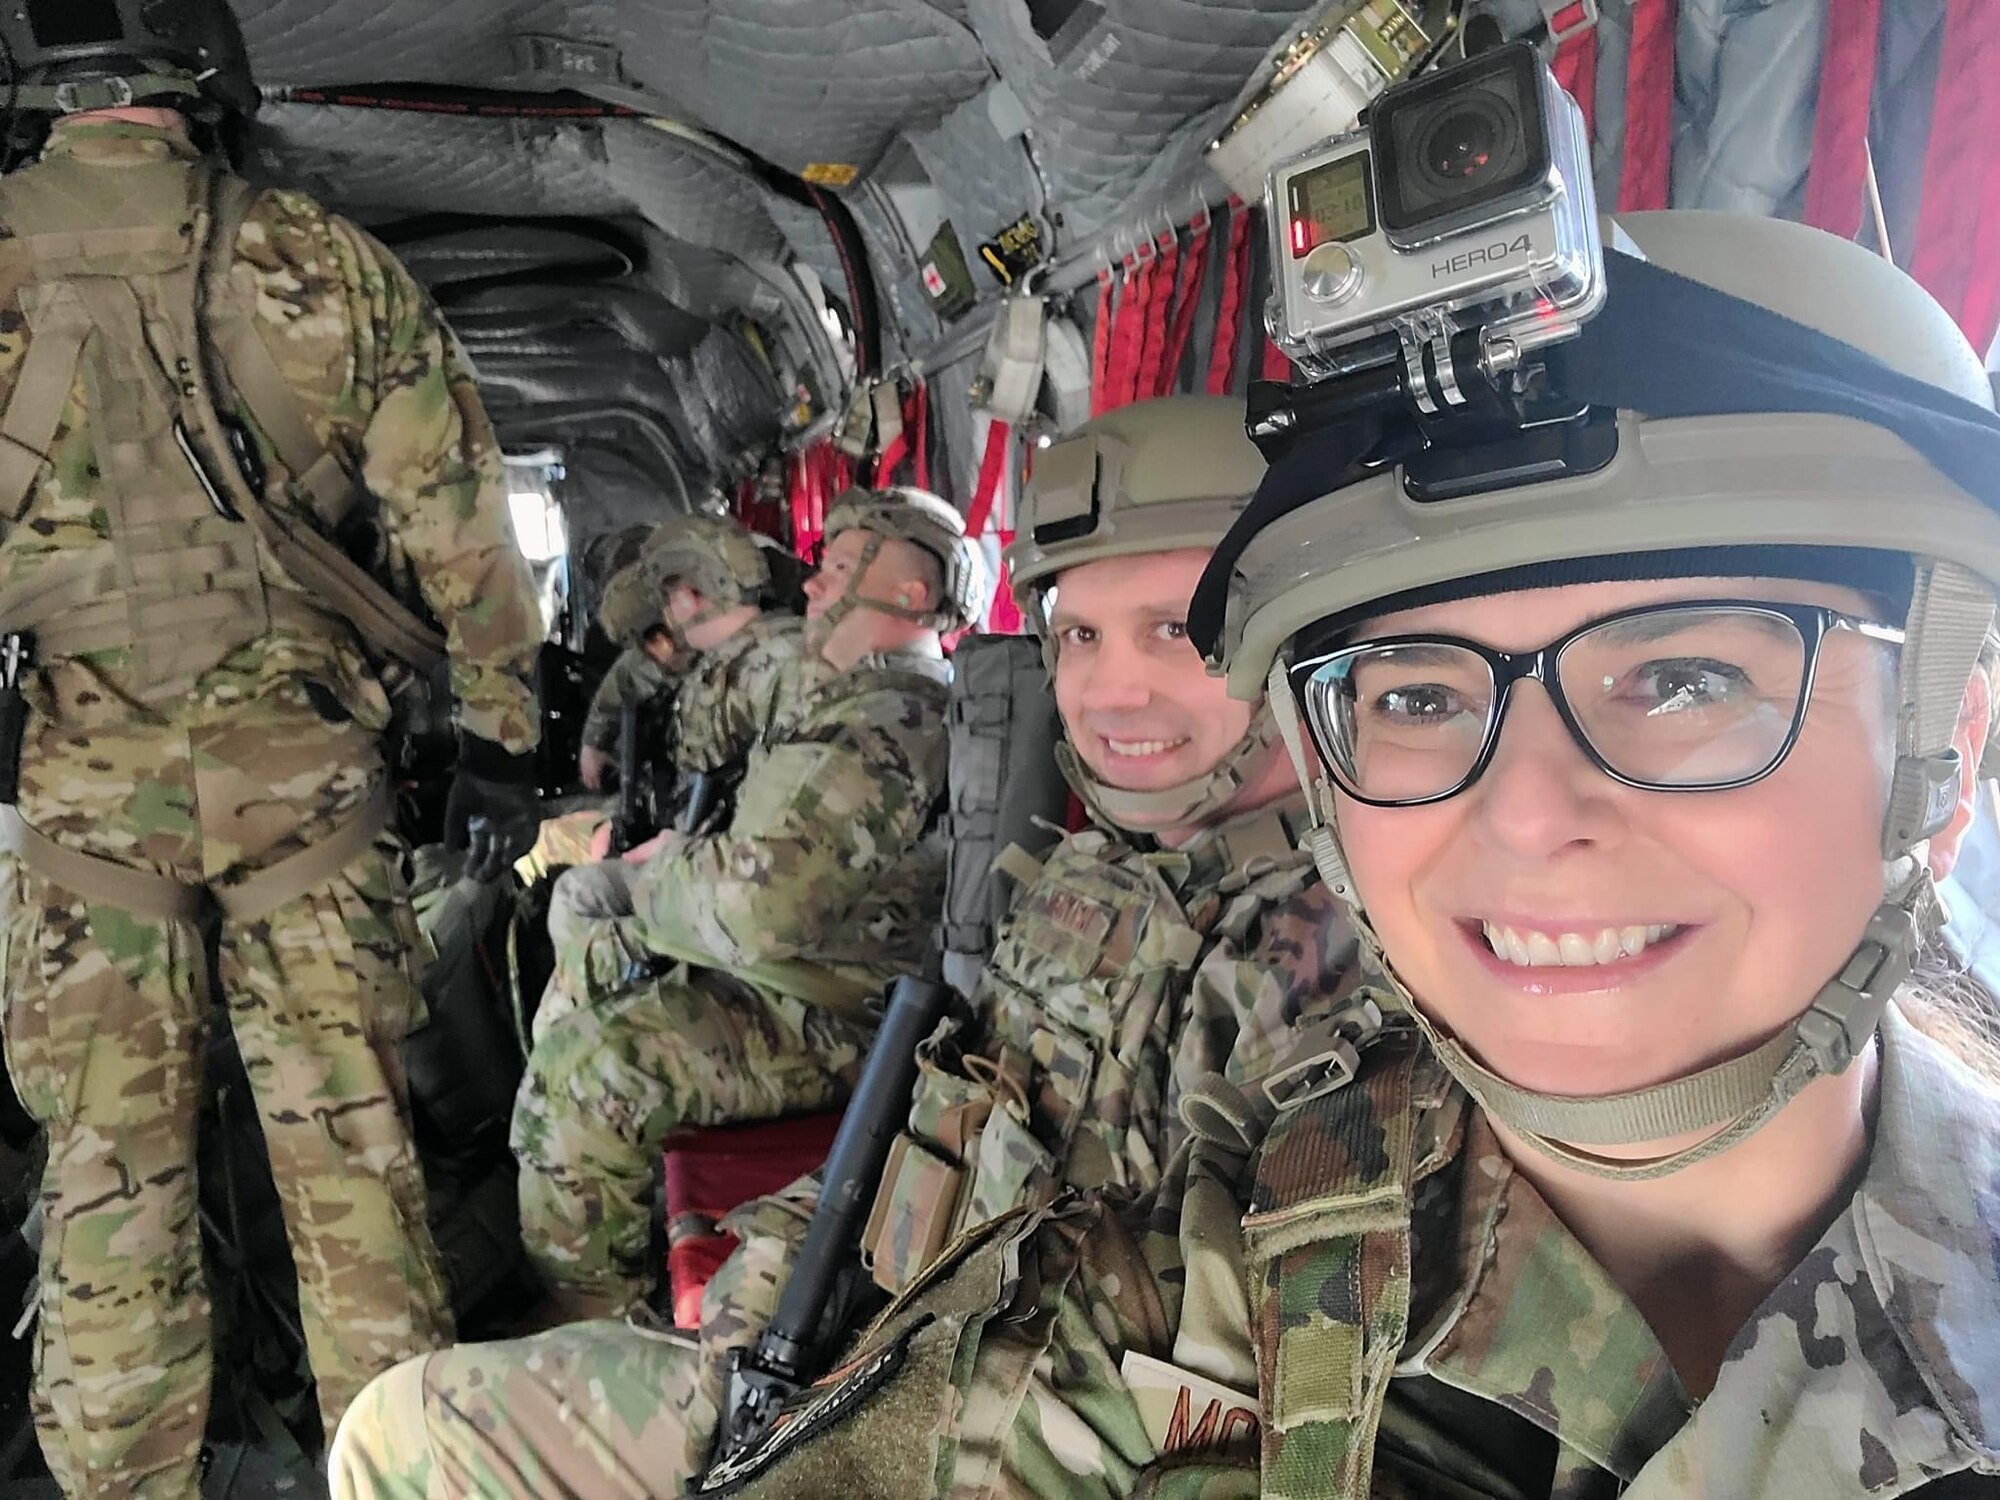 Chief Master Sgt. Jennifer McKendree, the 910th Airlift Wing command chief, poses for a selfie on a CH-47 Chinook helicopter while preparing to fly to Camp James A. Garfield Joint Military Training Center, Ohio, with members of the 910th Security Forces Squadron at Youngstown Air Reserve Station, Ohio, March 31, 2022.